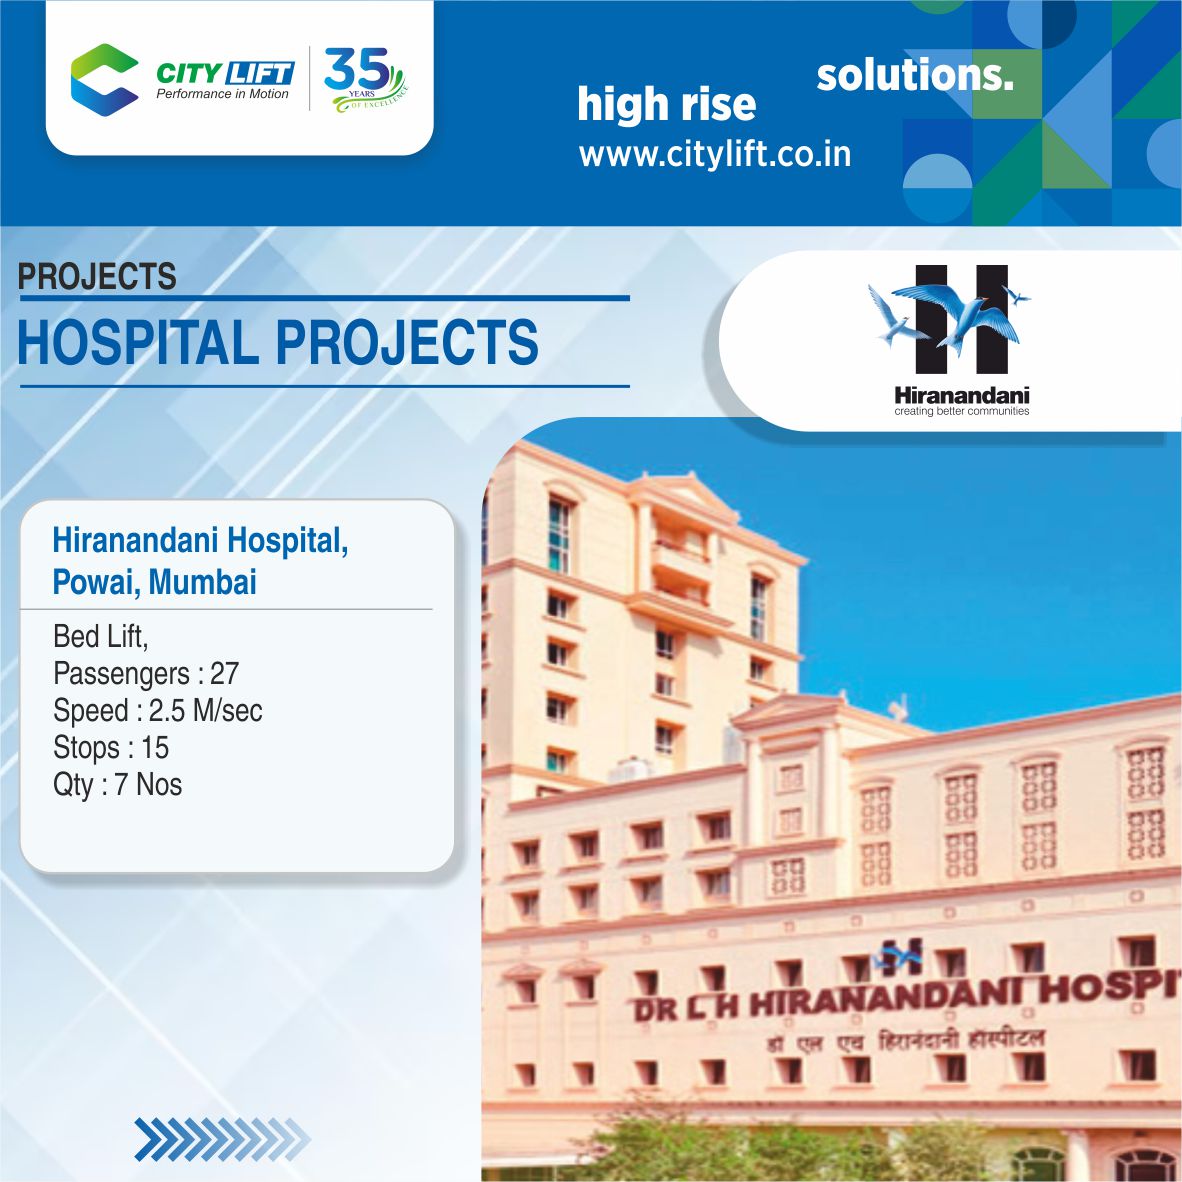 HOSPITAL PROJECTS